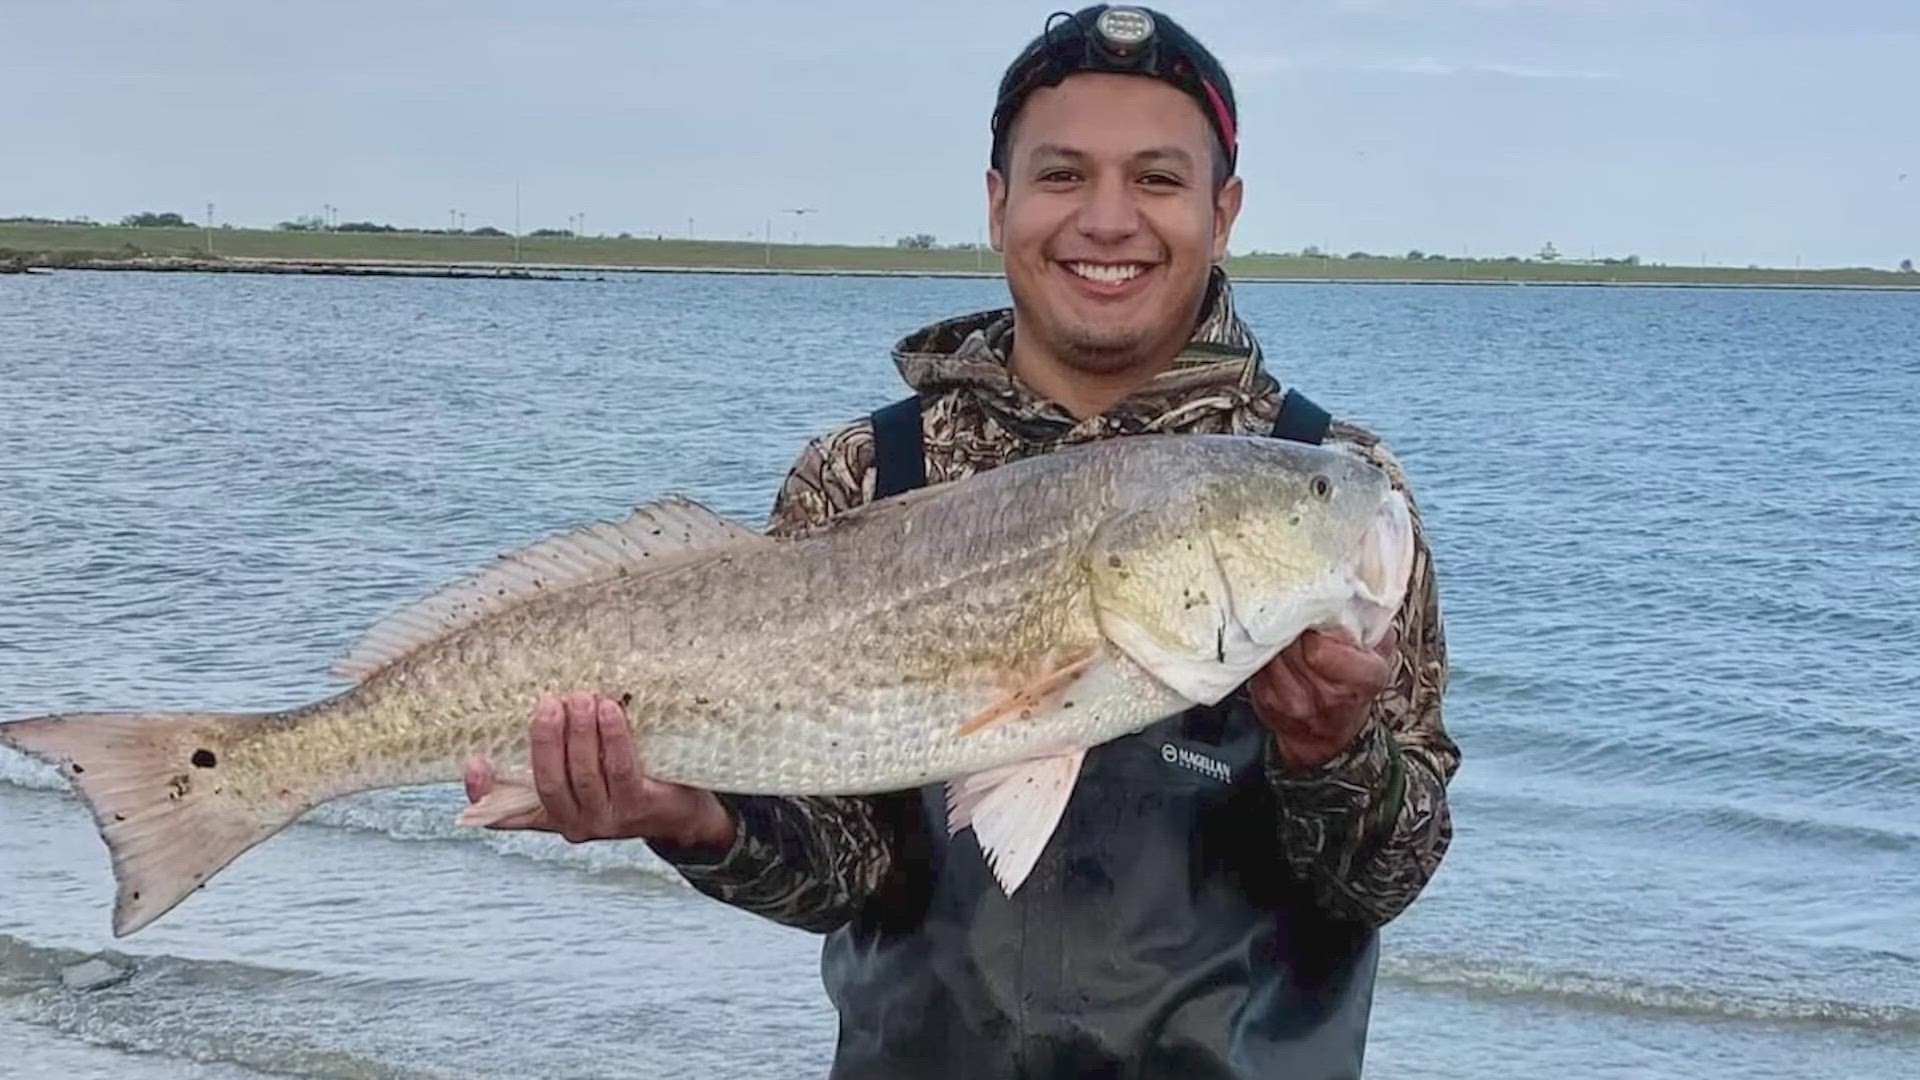 Ricardo Vega, 27, was alone in a Toyota sedan when he stopped at the stop sign, Houston police said. They believe the shots came from a tan or beige Chevy pickup.